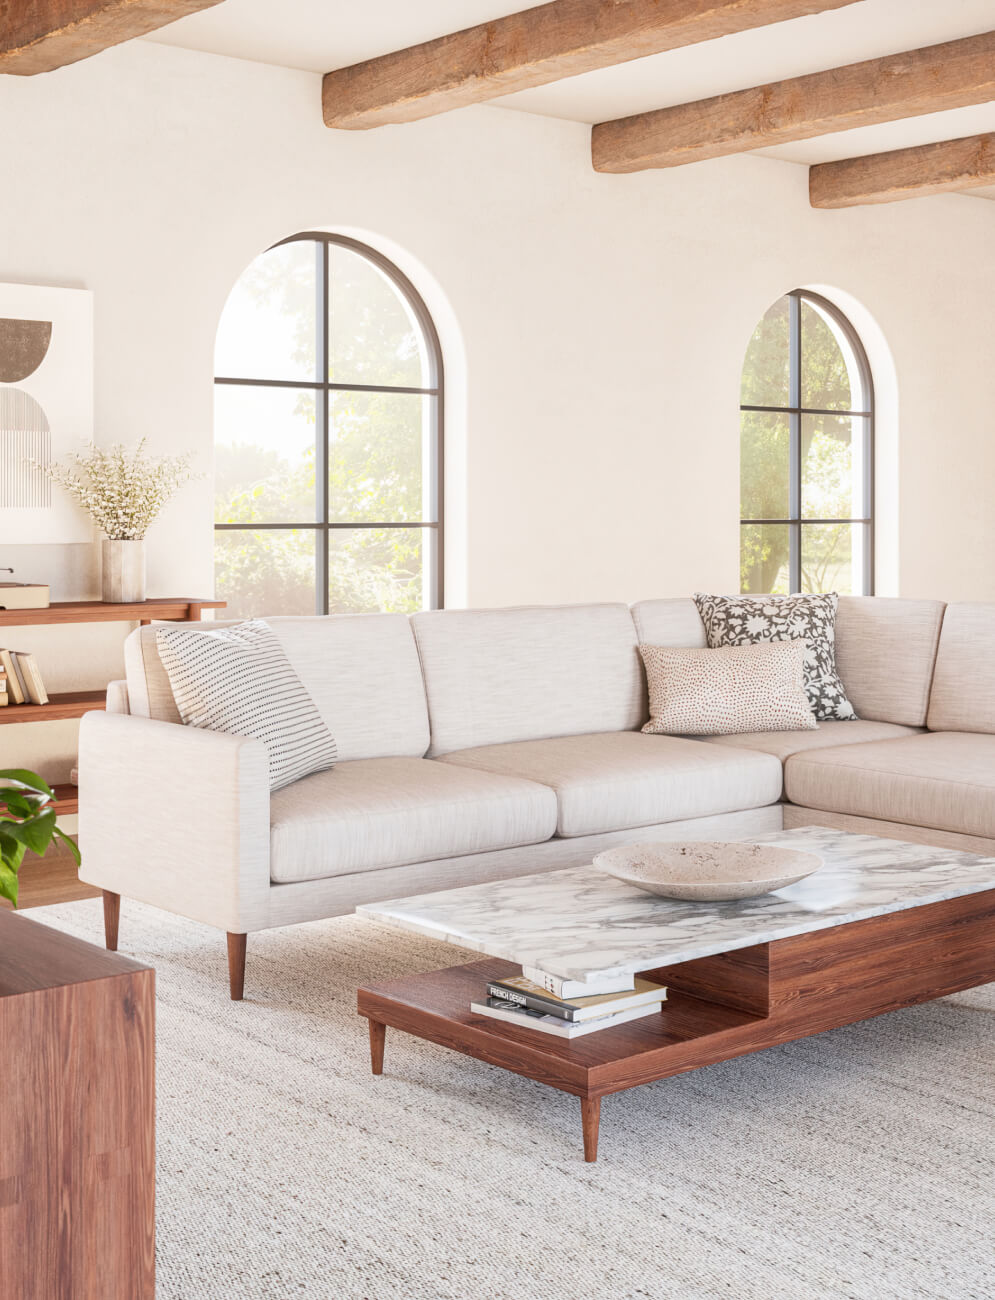 Beige Lala Bumper Sectional in white room with walnut coffee table